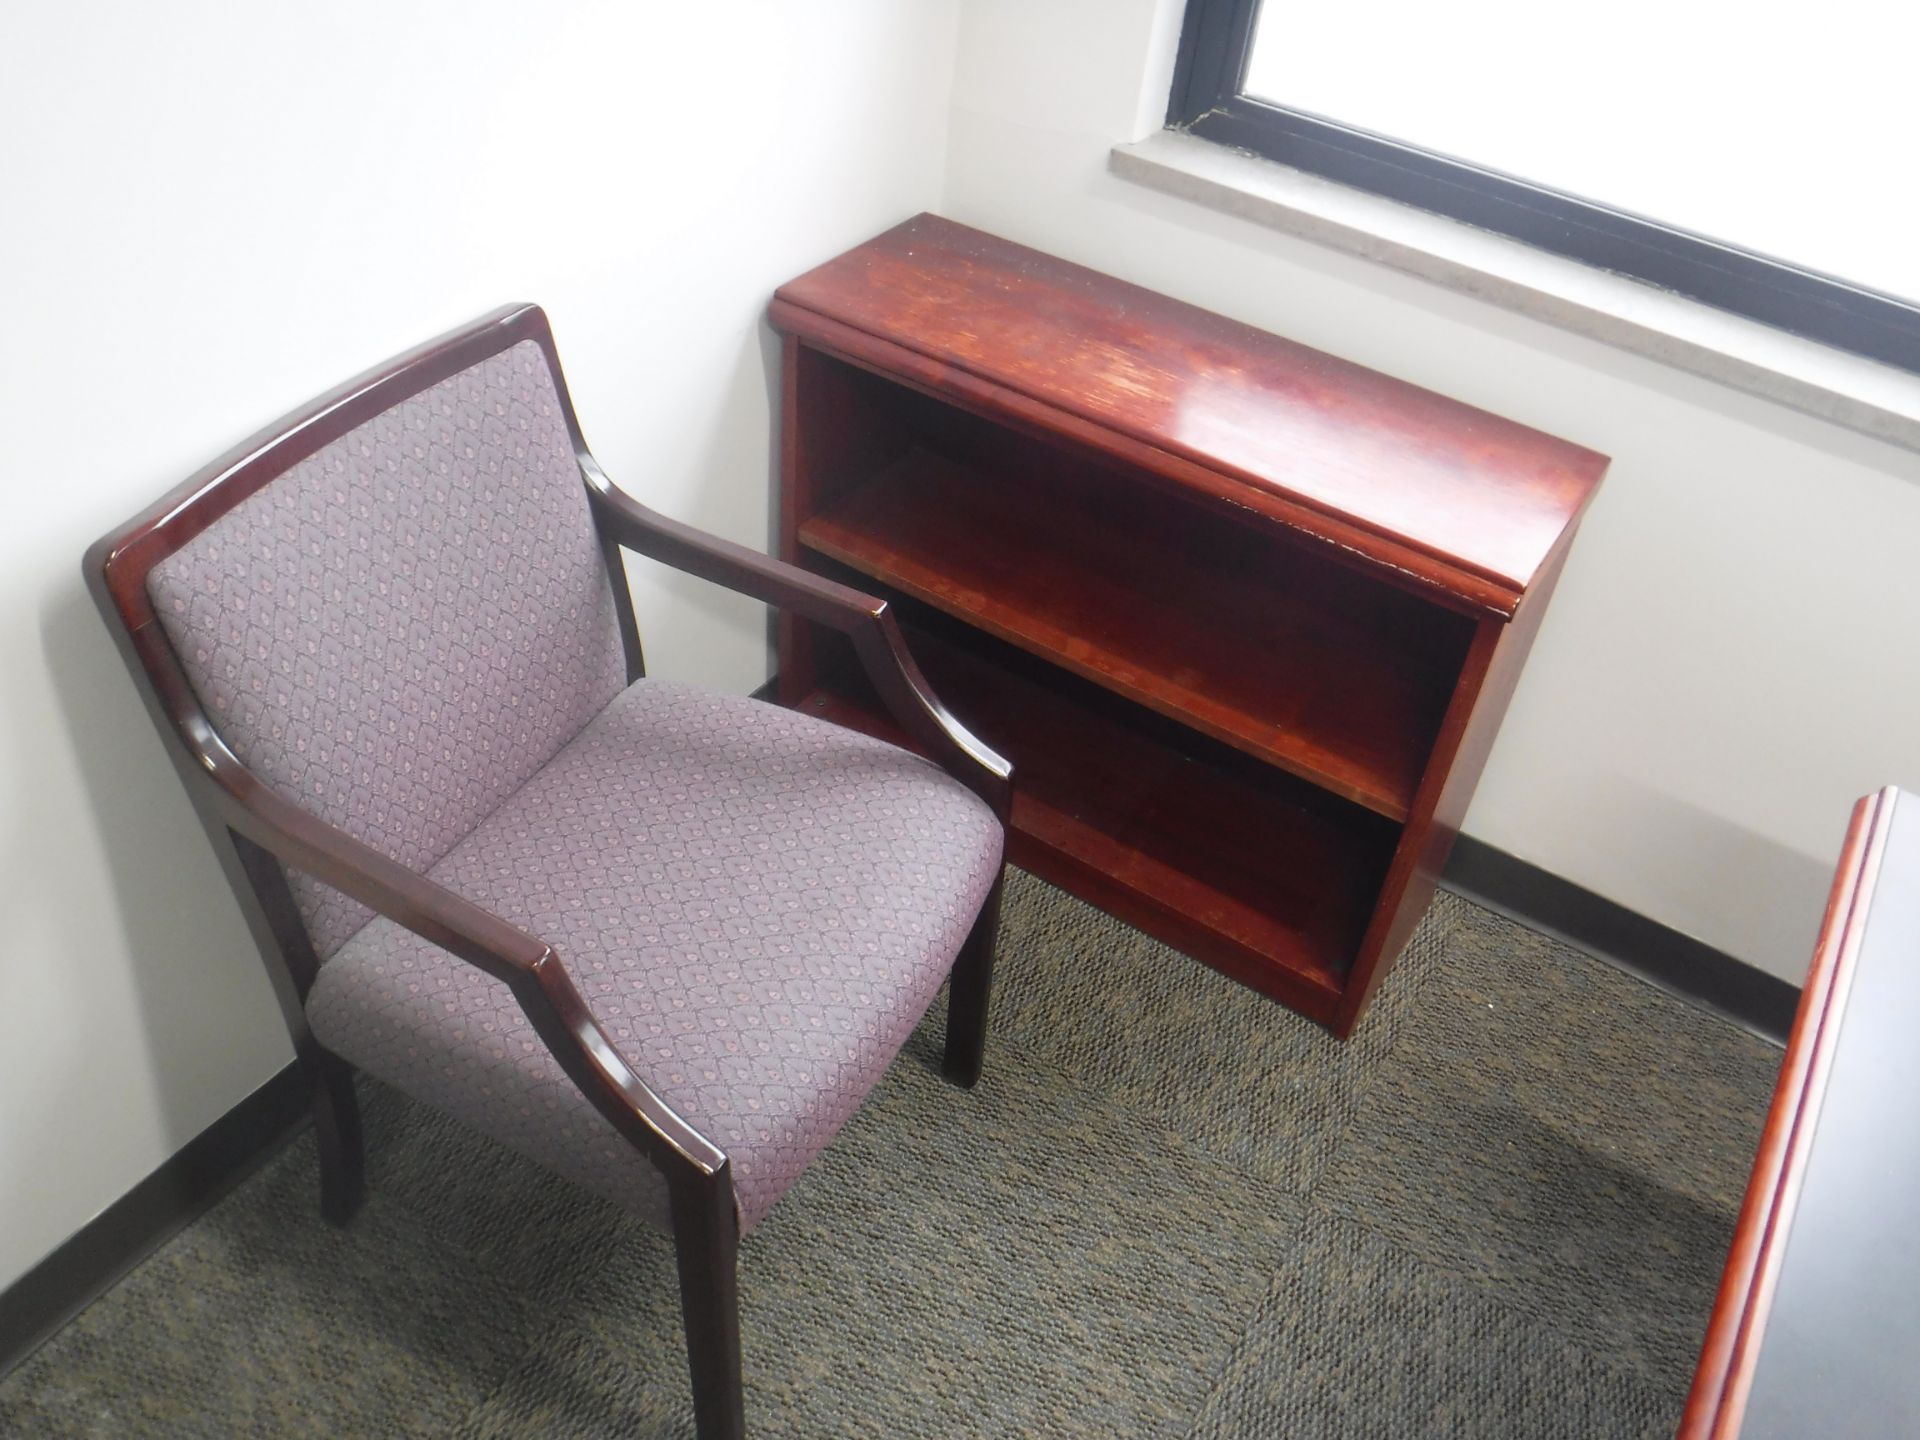 Office Furniture - Image 2 of 2